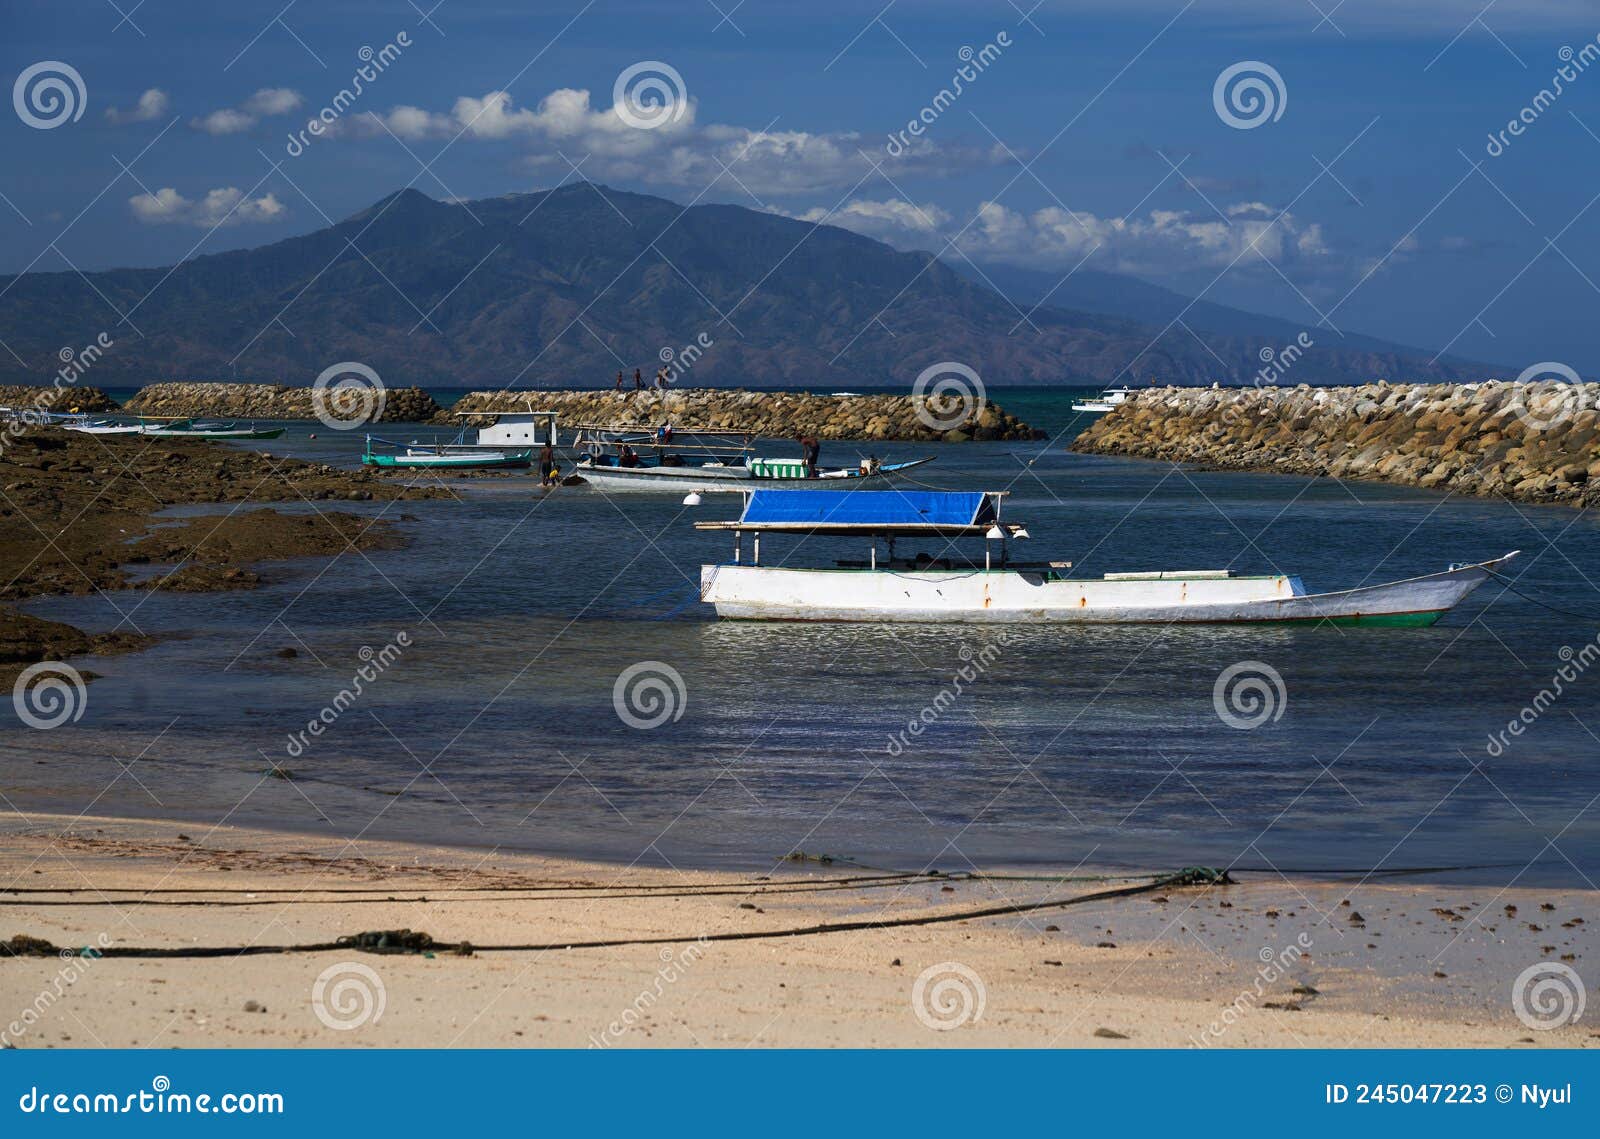 beach with fishing boat in asia.